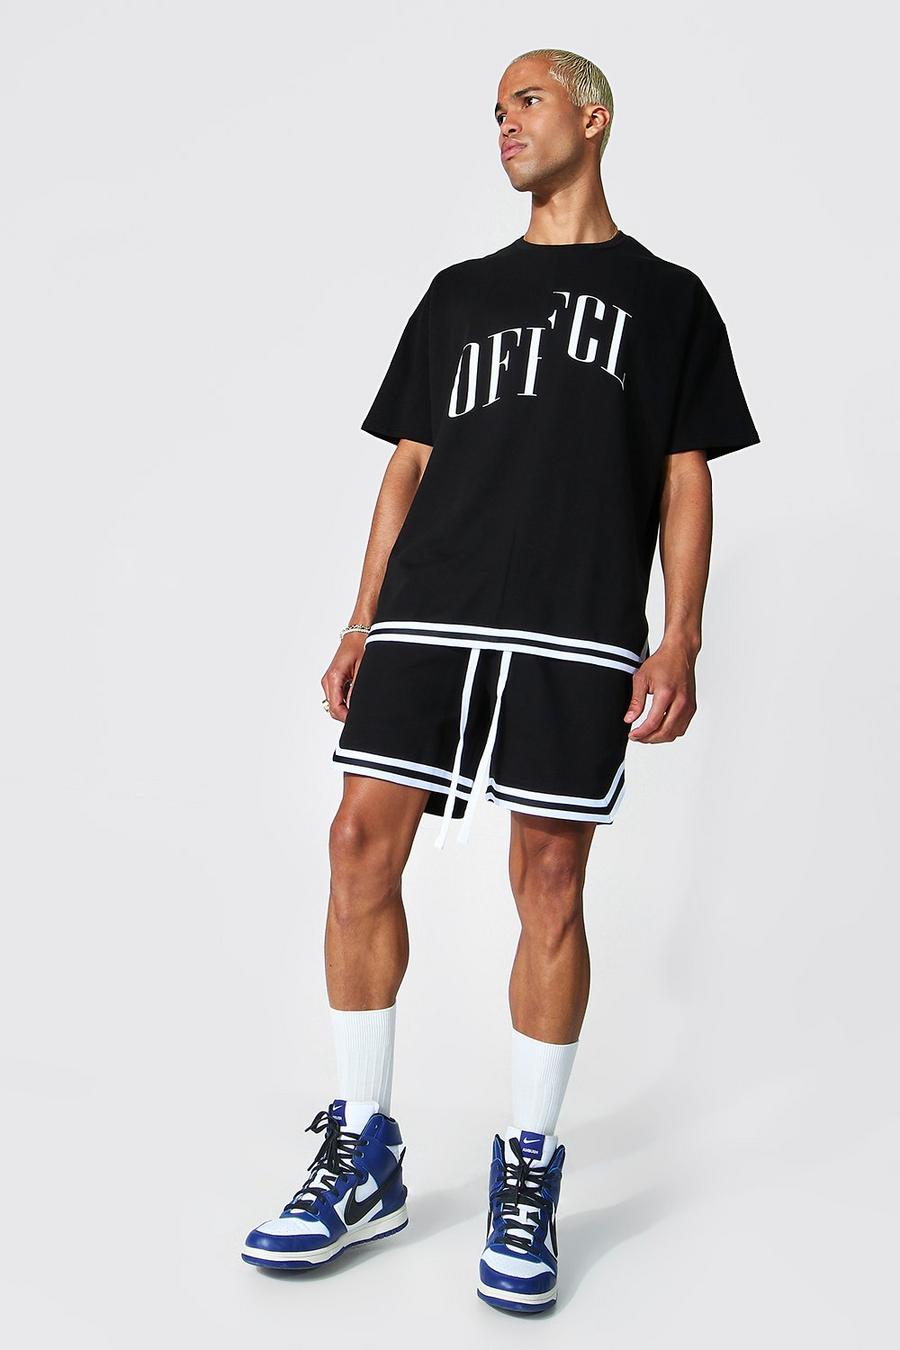 Black Oversized Offcl T-Shirt And Basketball Short image number 1